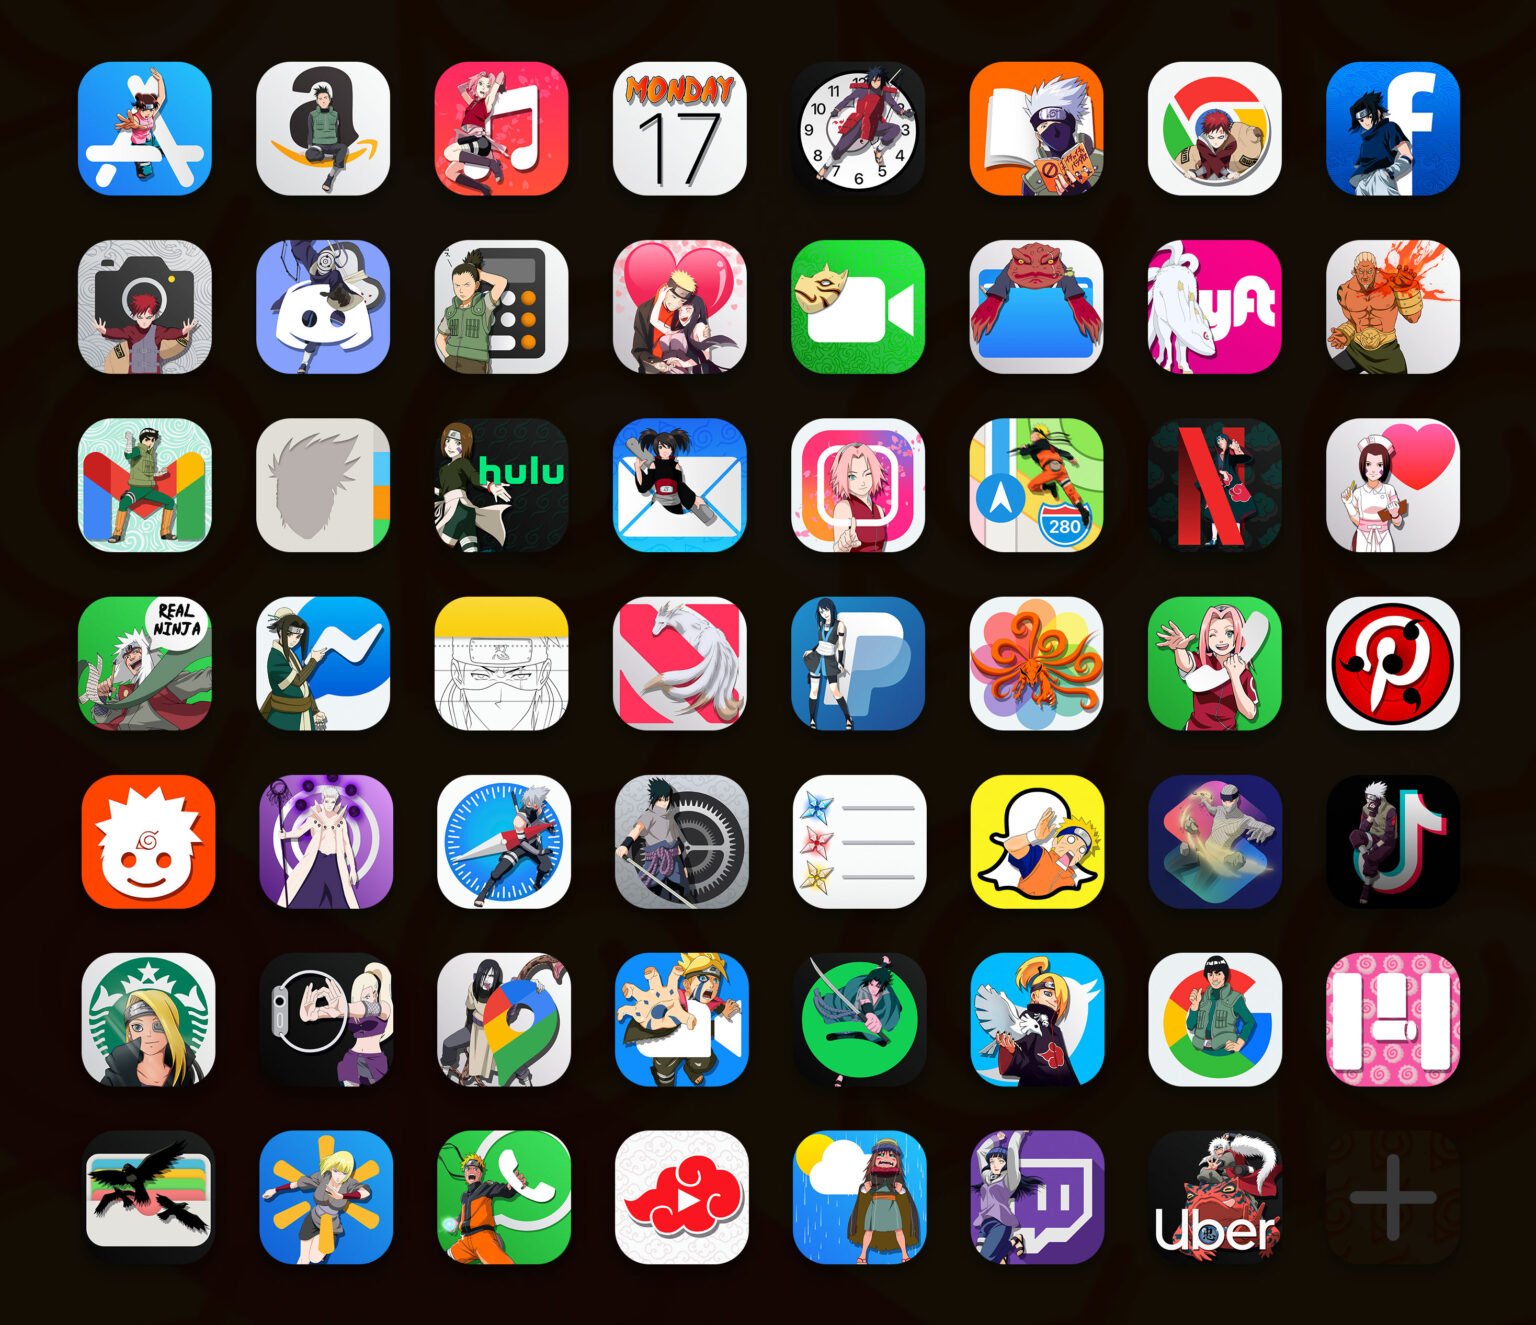 free app icon pack